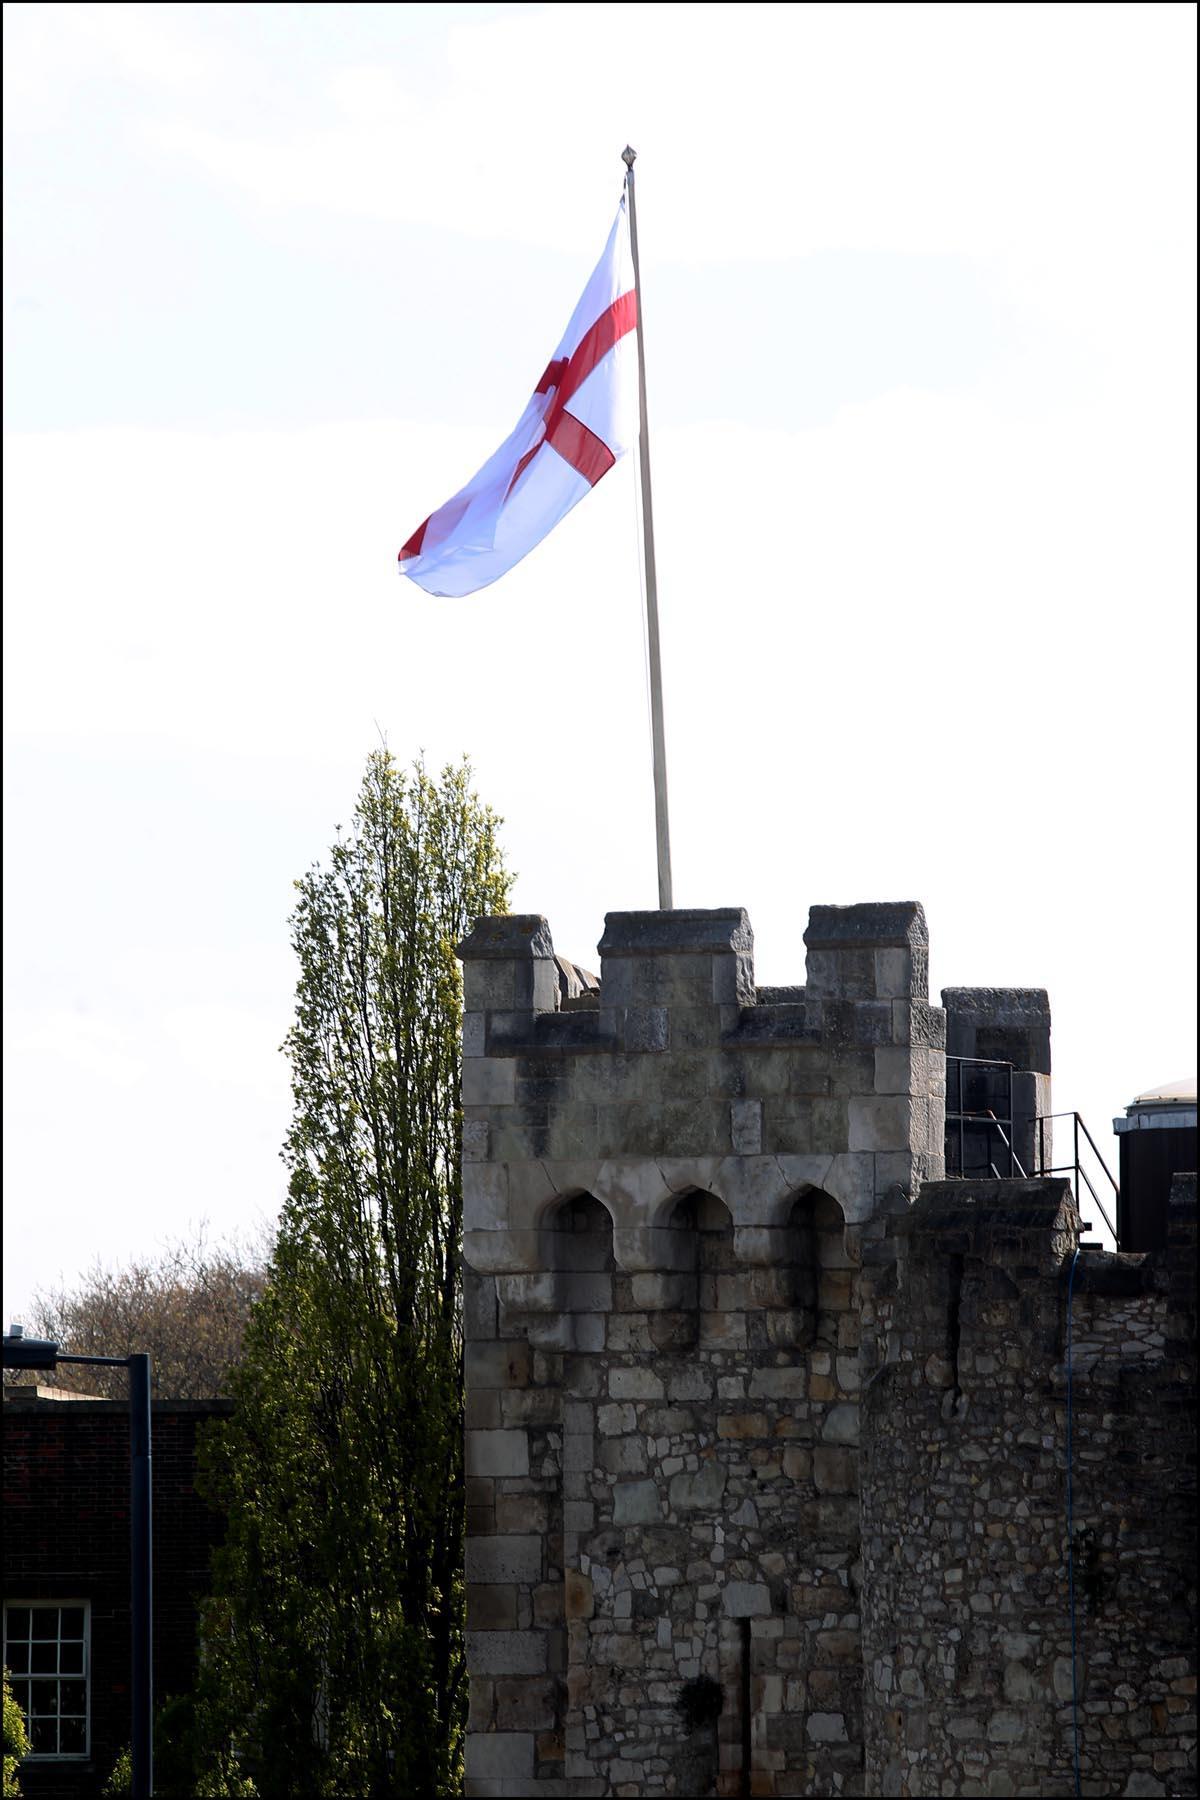 St George's Flag flies above the Bargate